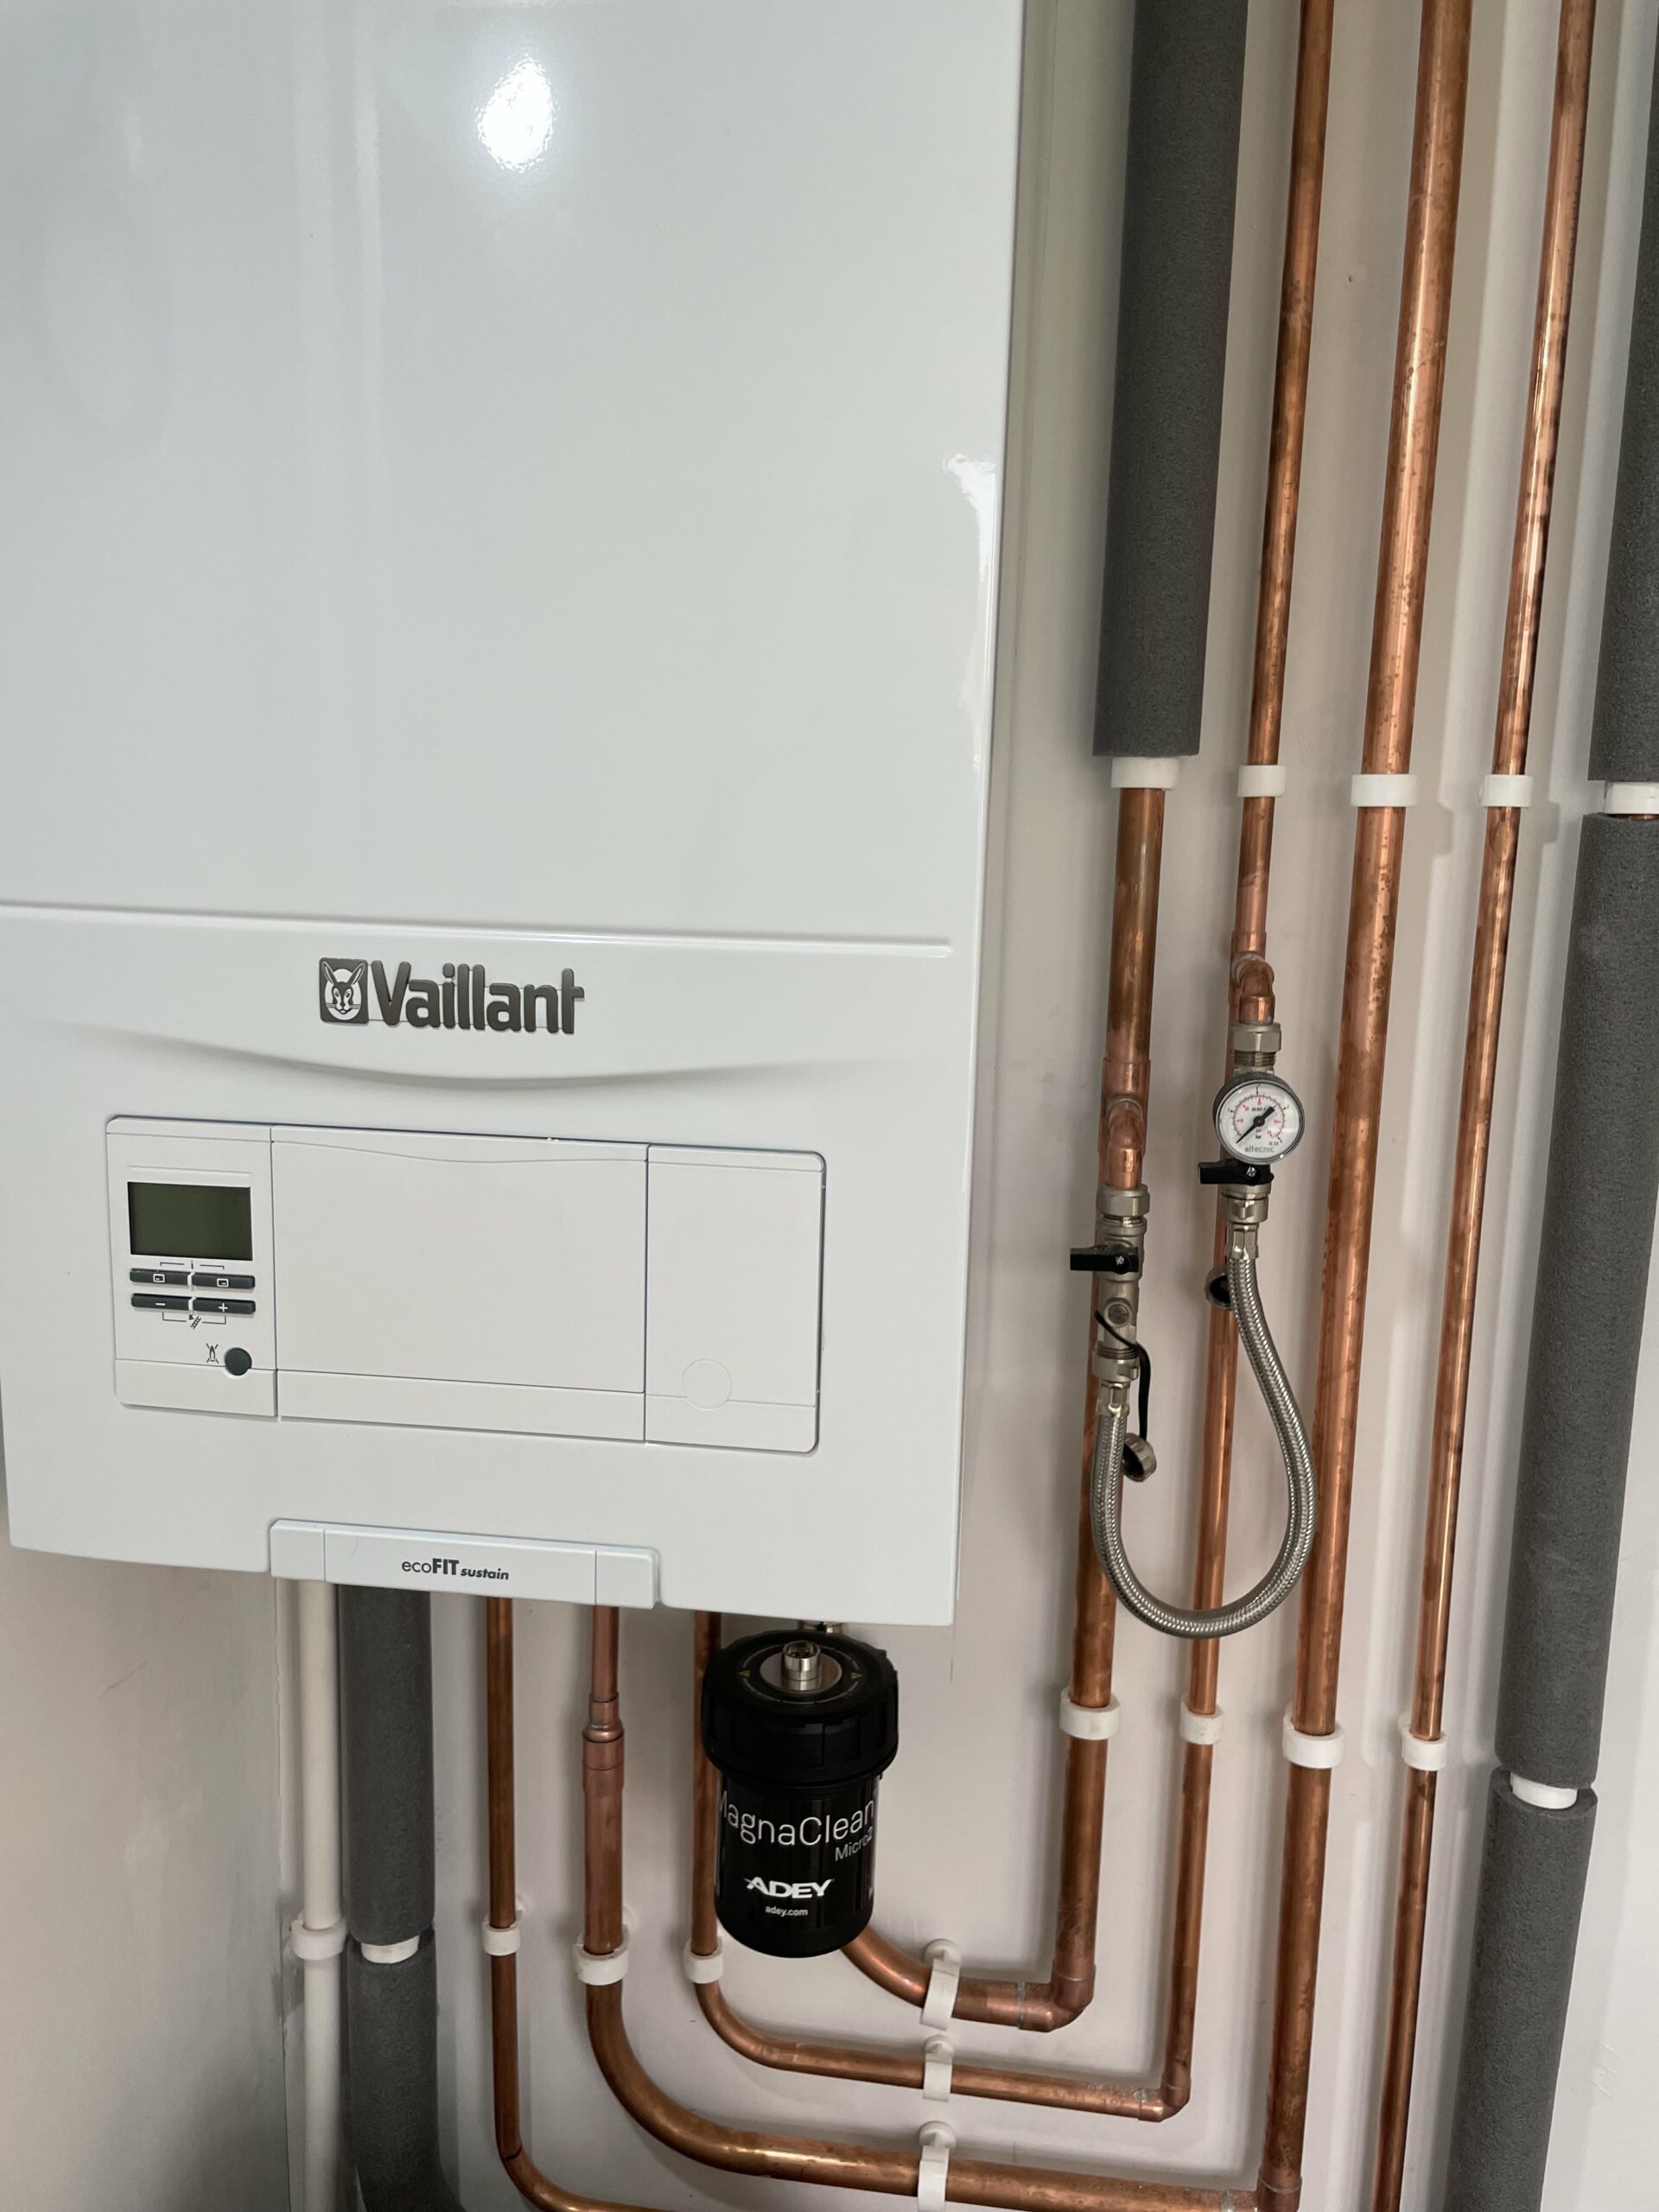 Gas Boiler Maintenance And Repair Colchester